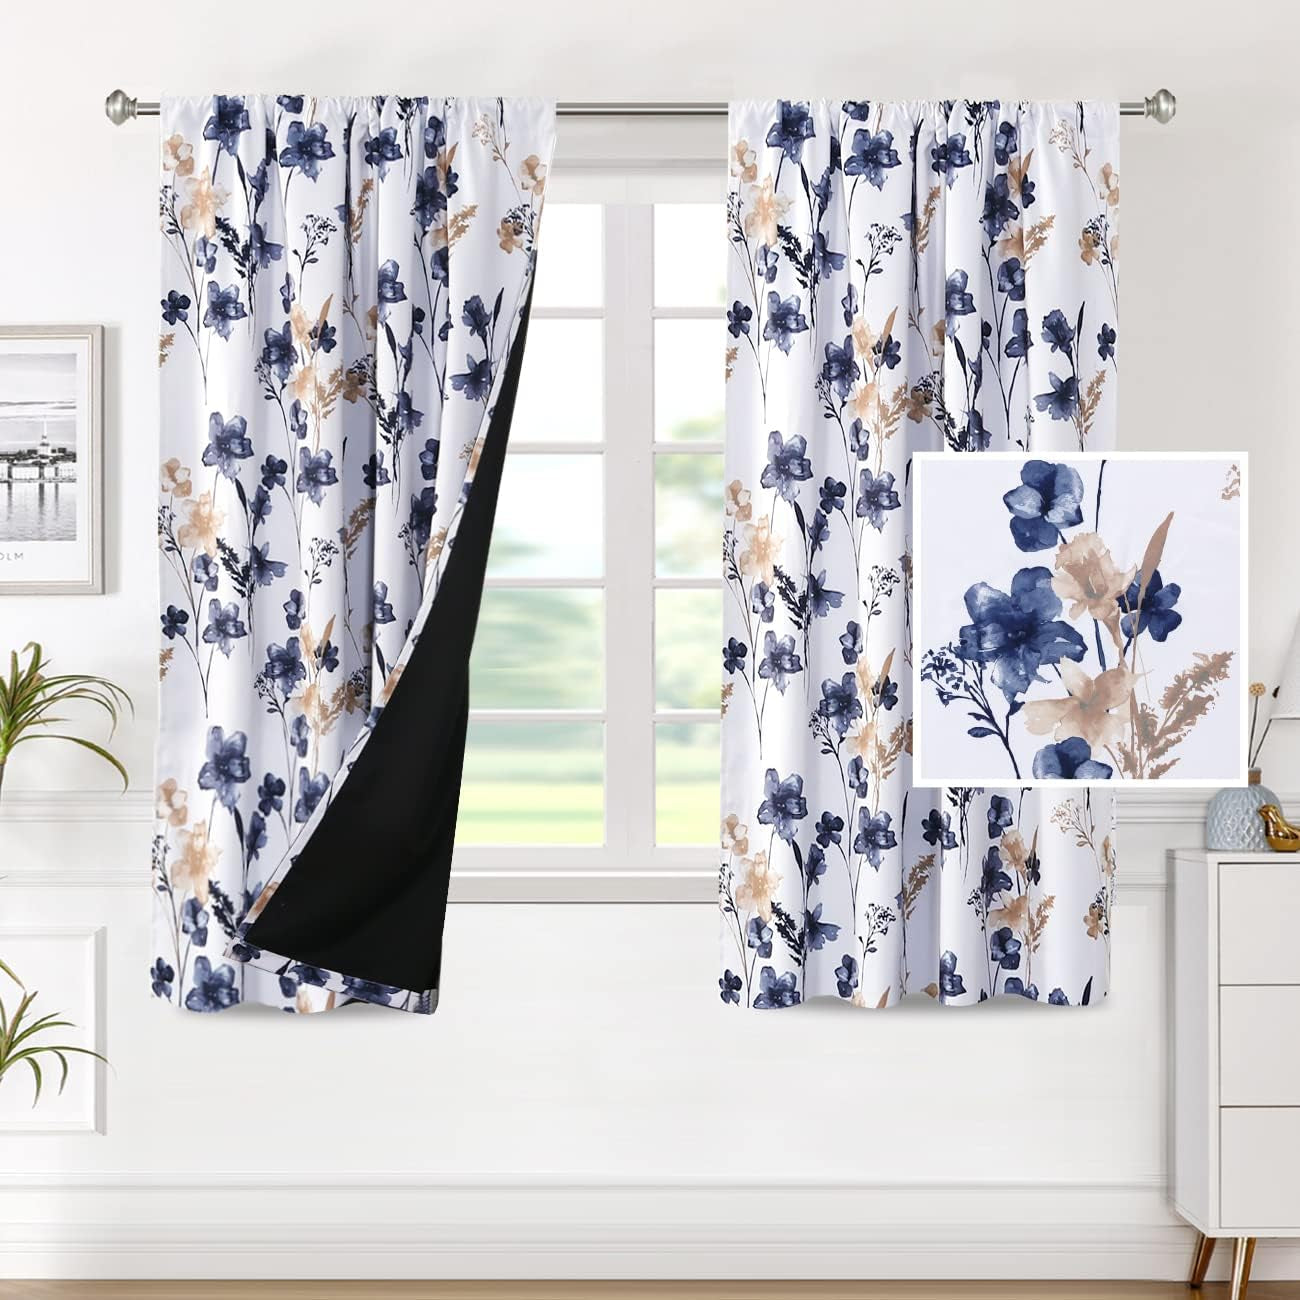 H.VERSAILTEX 100% Blackout Curtains for Bedroom Cattleya Floral Printed Drapes 84 Inches Long Leah Floral Pattern Full Light Blocking Drapes with Black Liner Rod Pocket 2 Panels, Navy/Taupe  H.VERSAILTEX Navy/Taupe 52"W X 63"L 